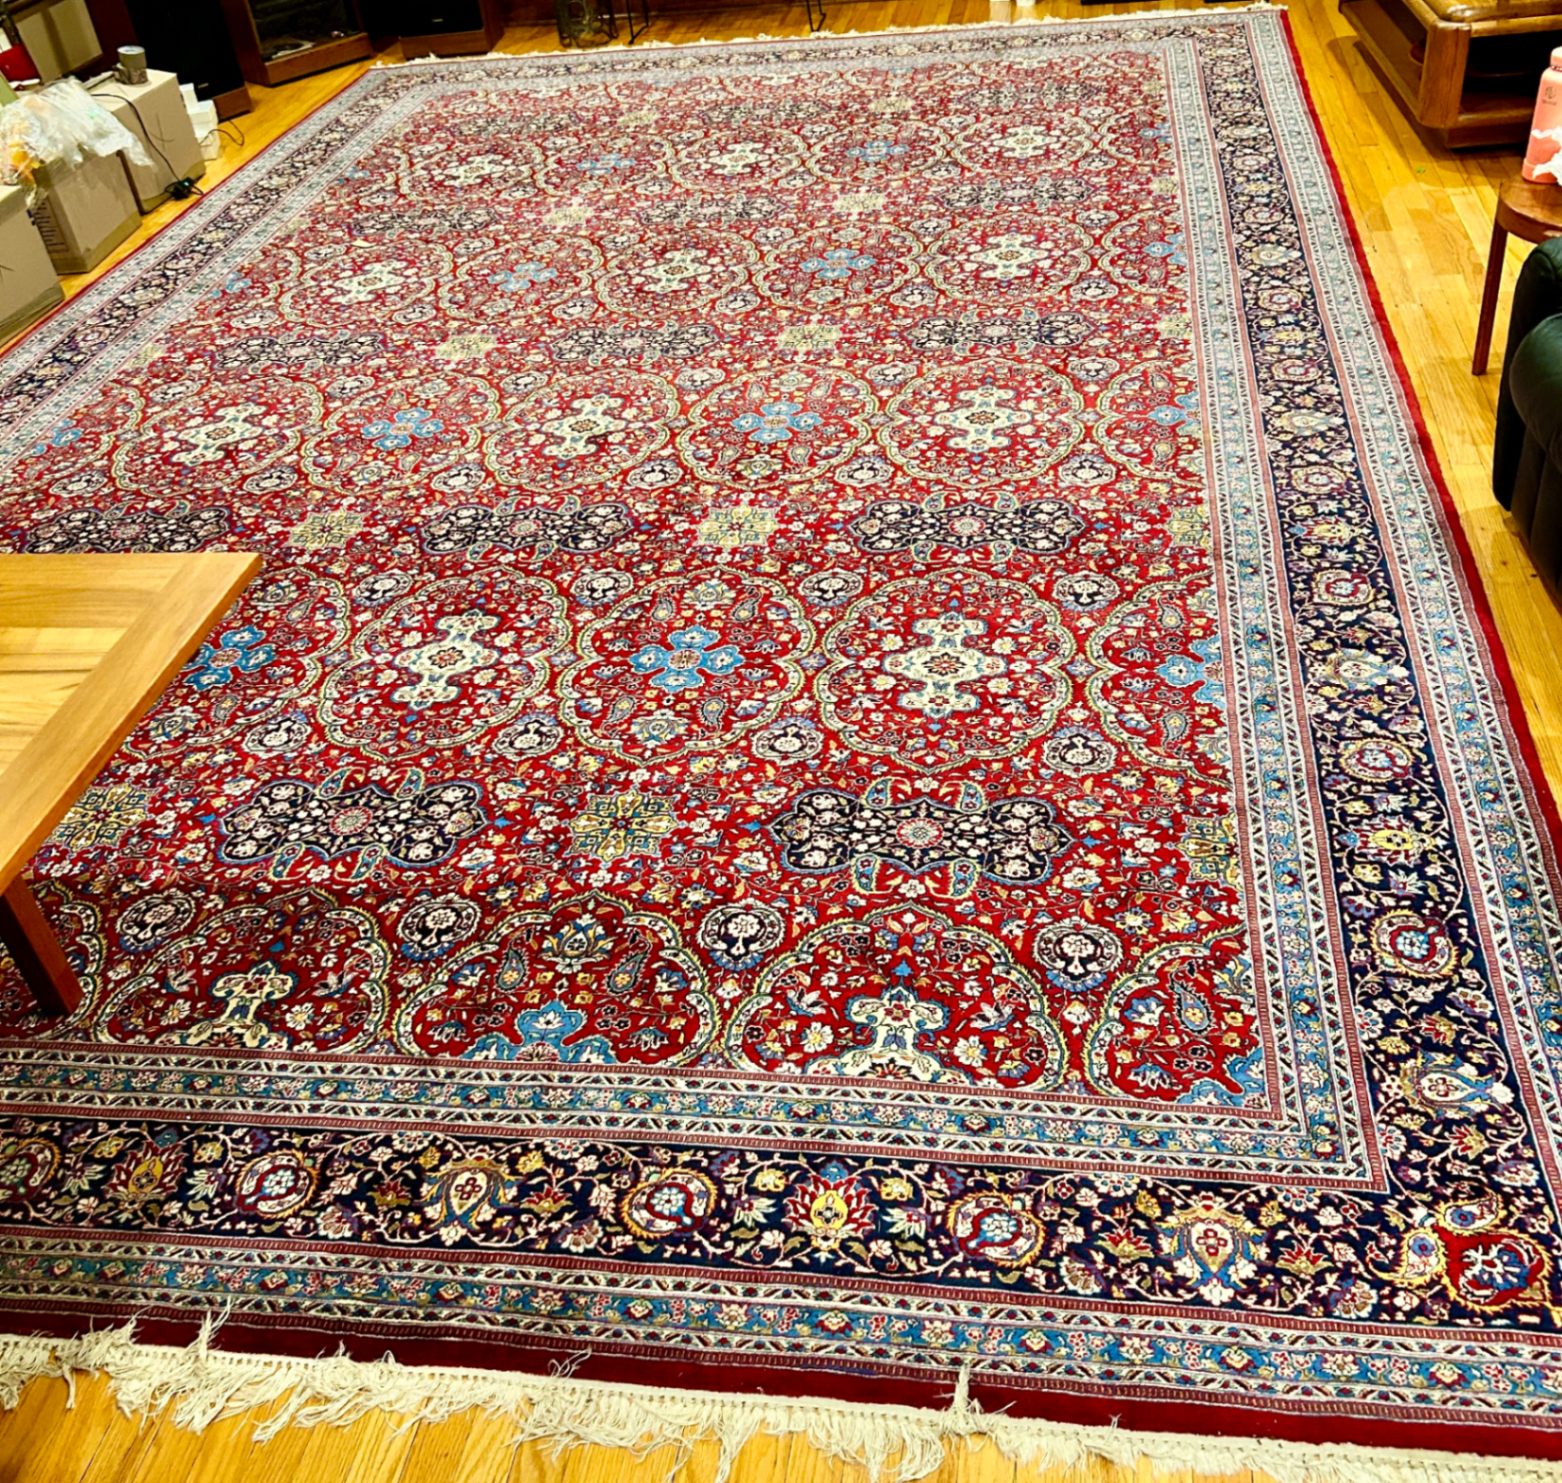 Trade embargo pulls the rug from under Persian carpet legacy - La